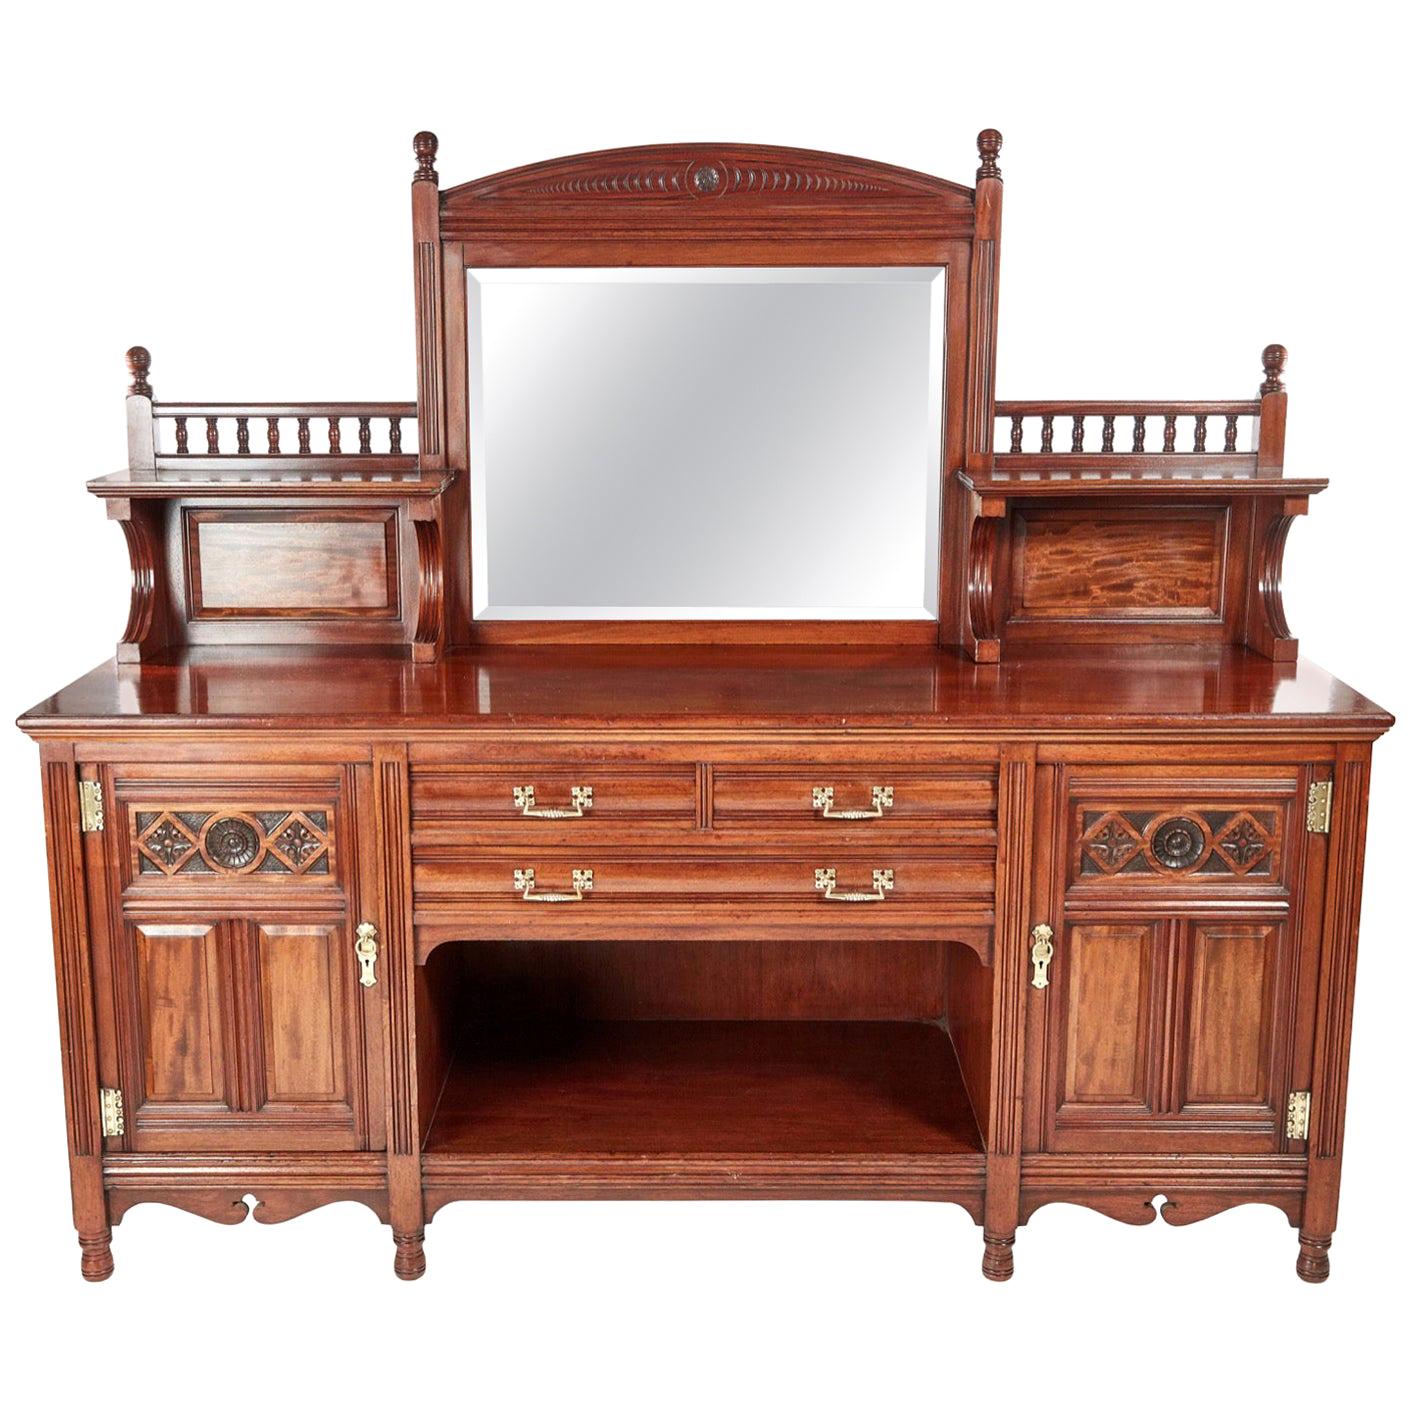 Magnificent Quality Antique Gillow & Co Mahogany Sideboard, circa 1880